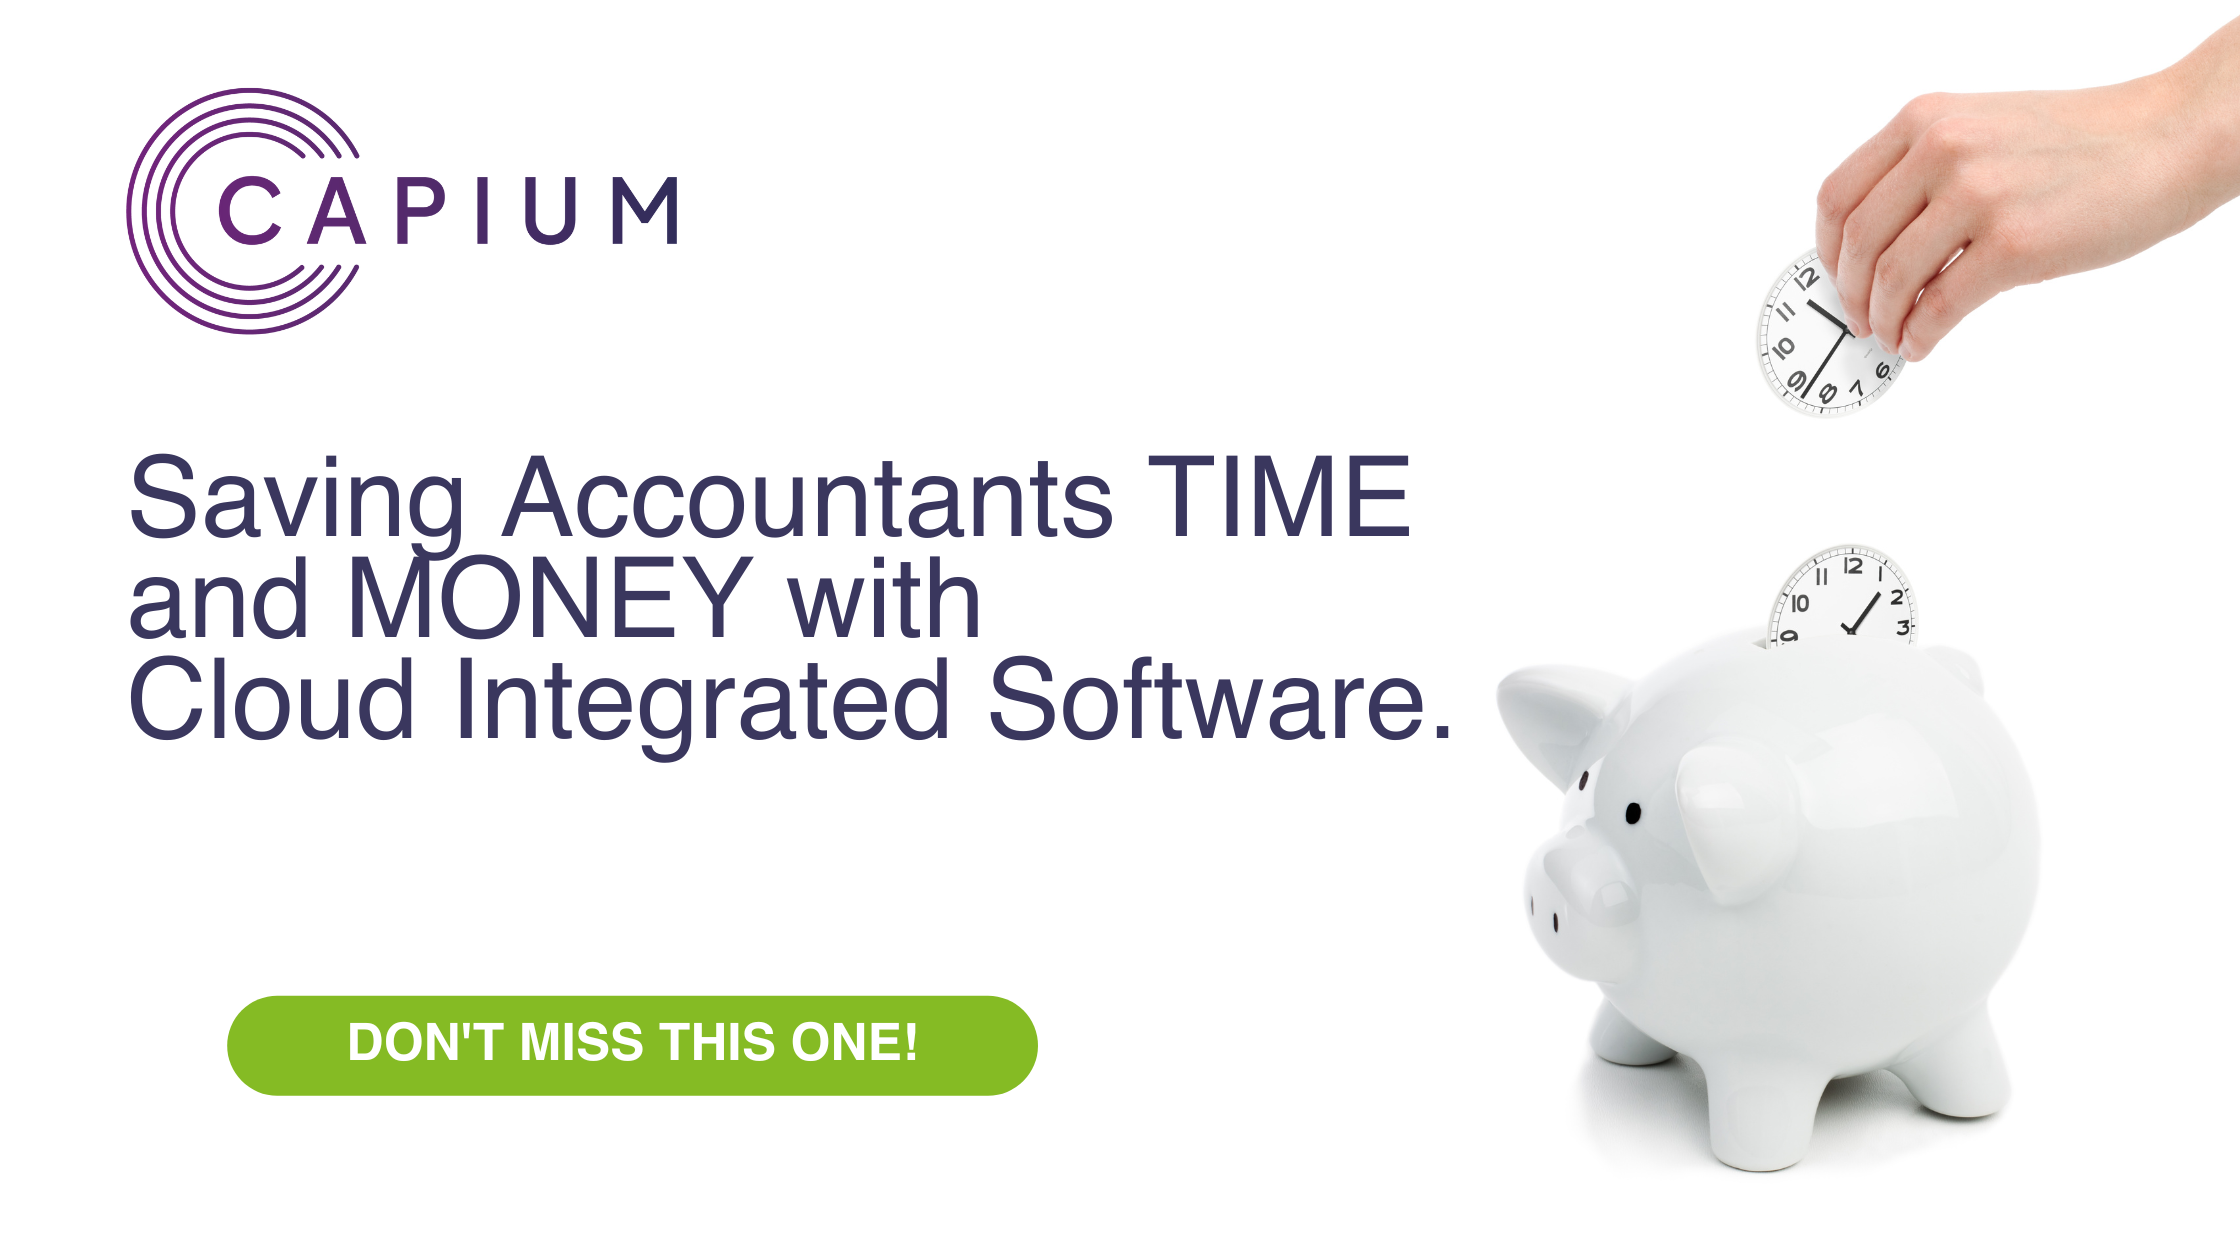 Learn how to save money and time with Capium logo